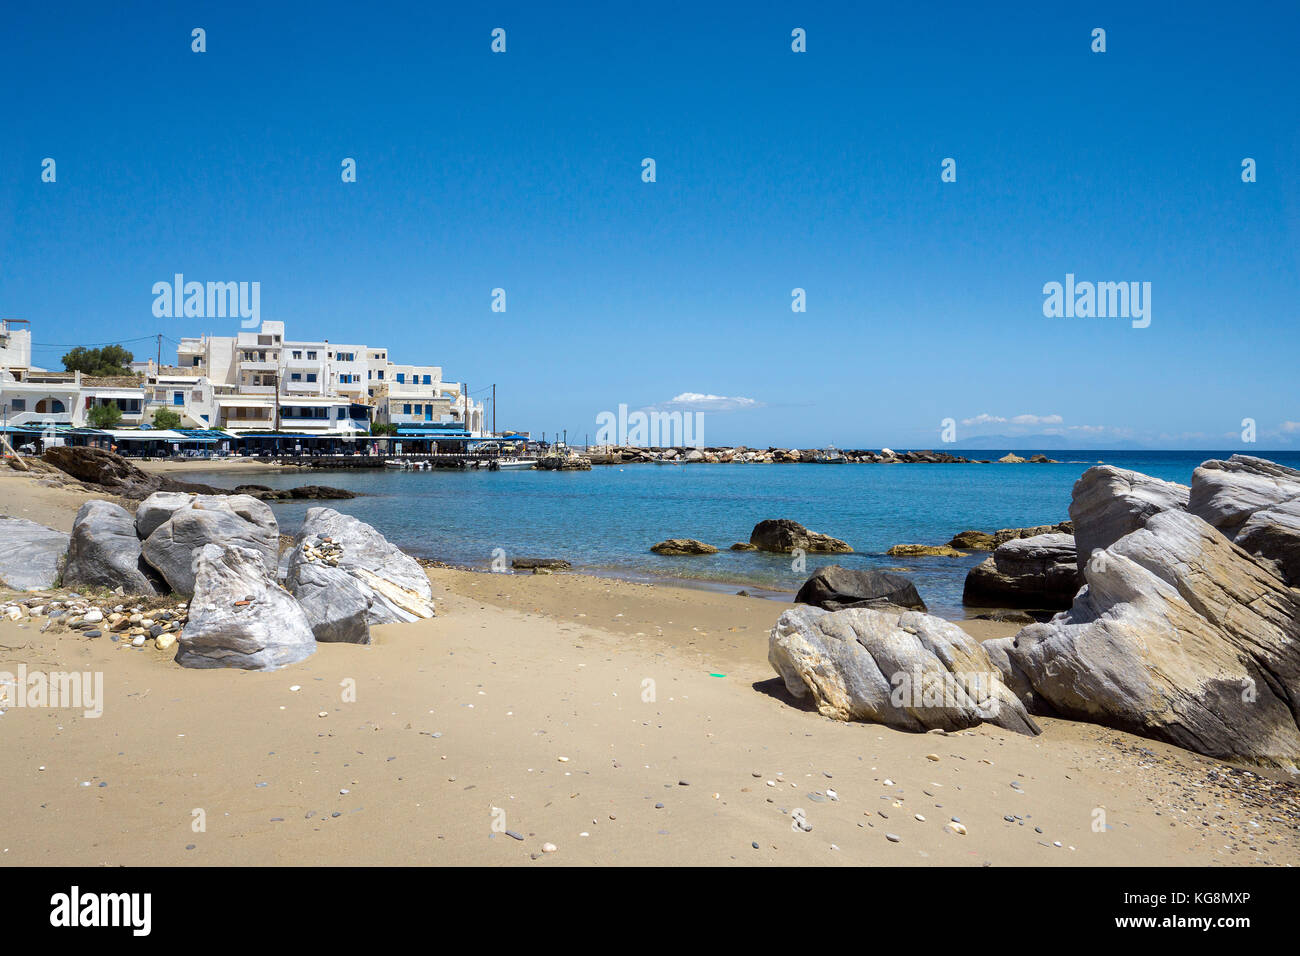 Beach of the small fishing village Apollonas, North side of Naxos island, Cyclades, Aegean, Greece Stock Photo